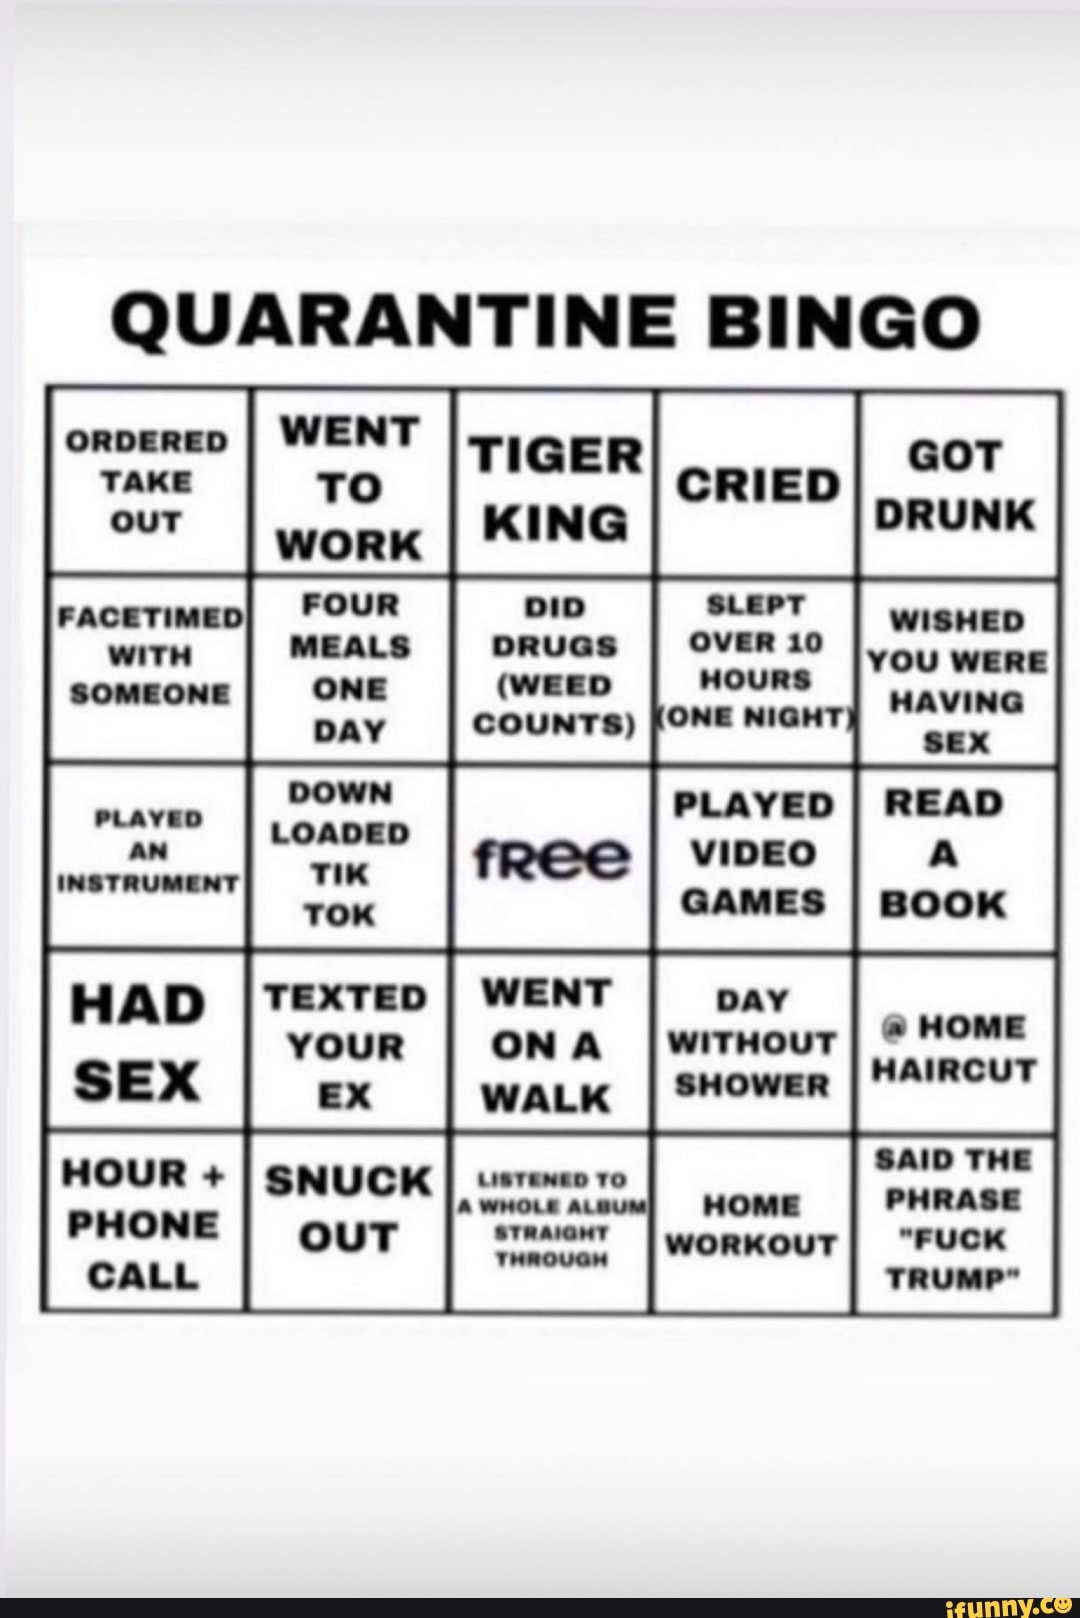 Quarantine Bingo Wished You Were Having Sex Played I Read Over 10 Hours Games I Book Said The